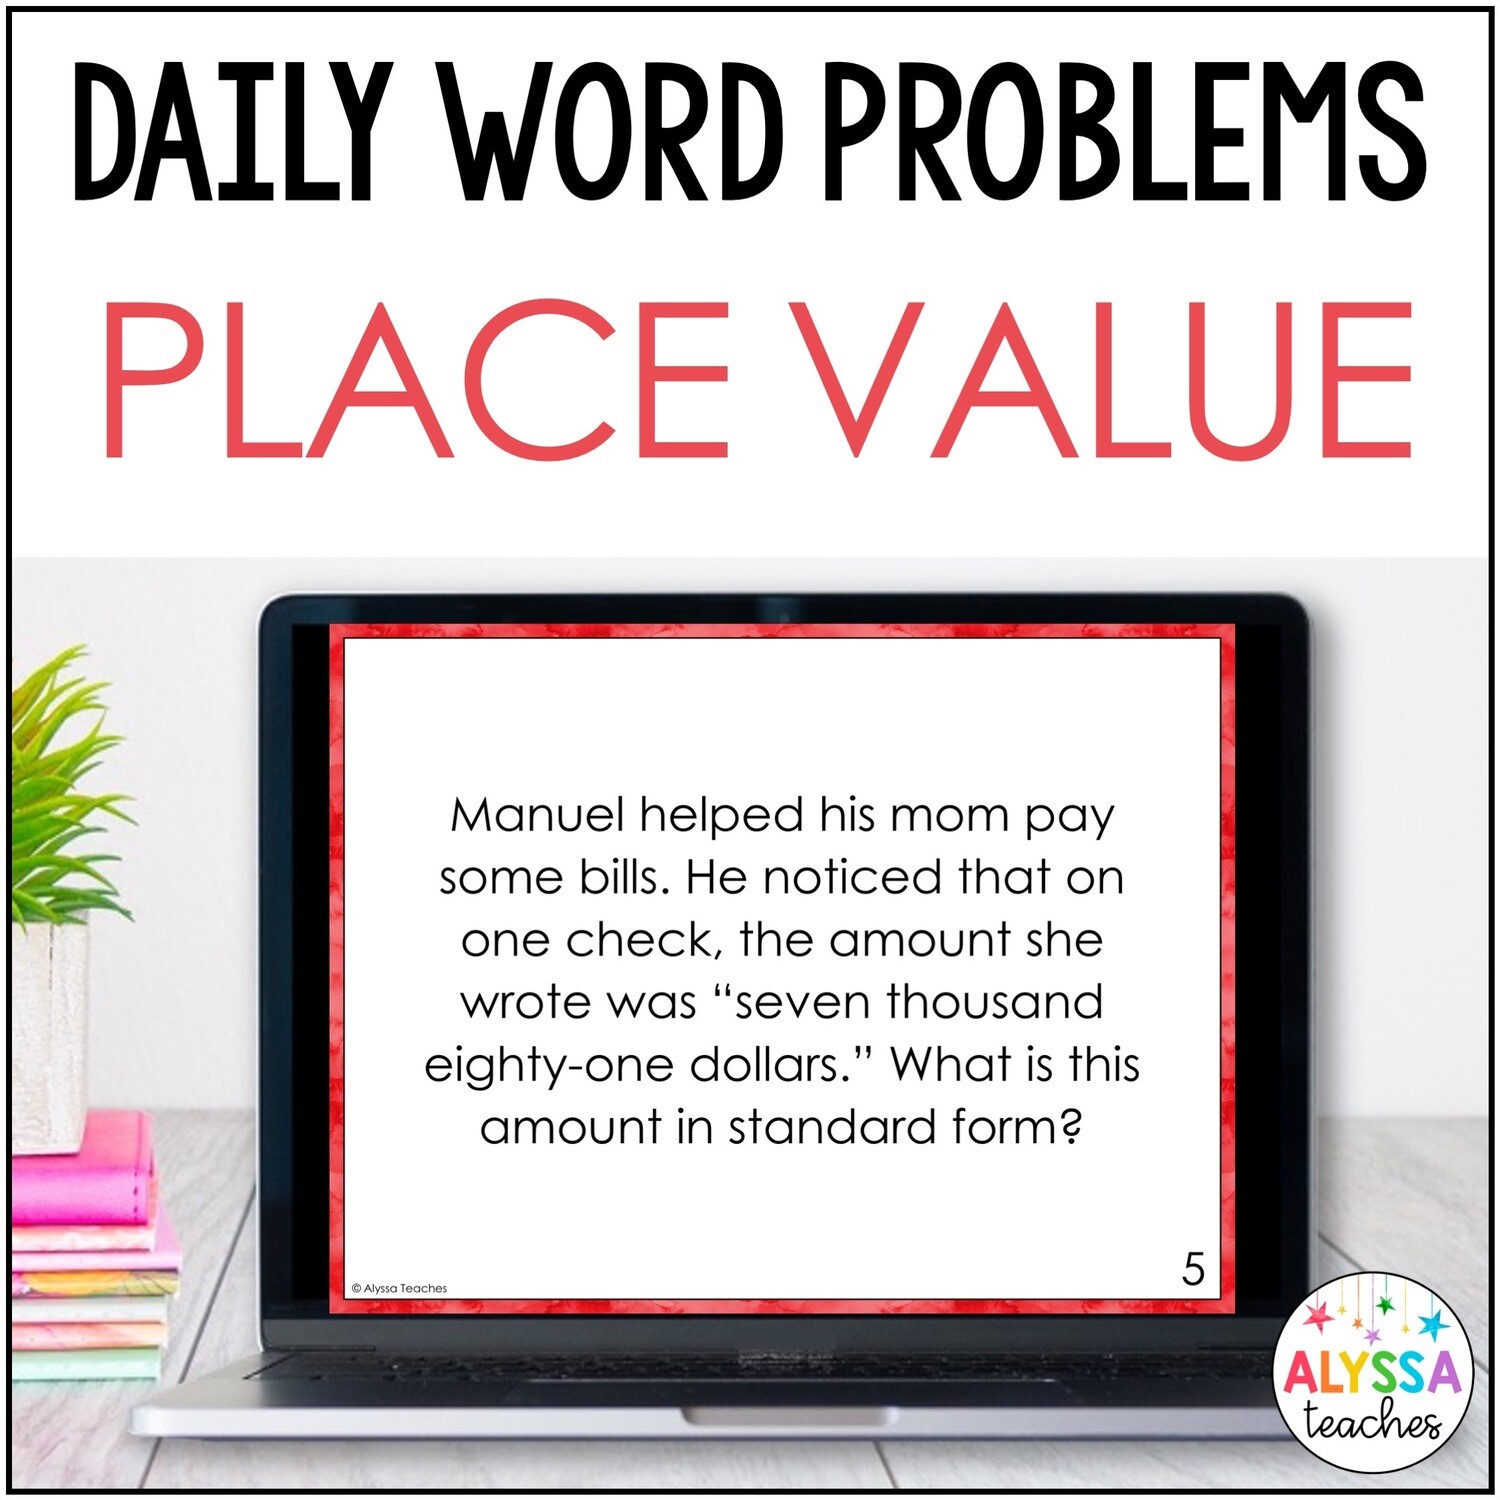 Place Value Word Problems for Daily Math Review